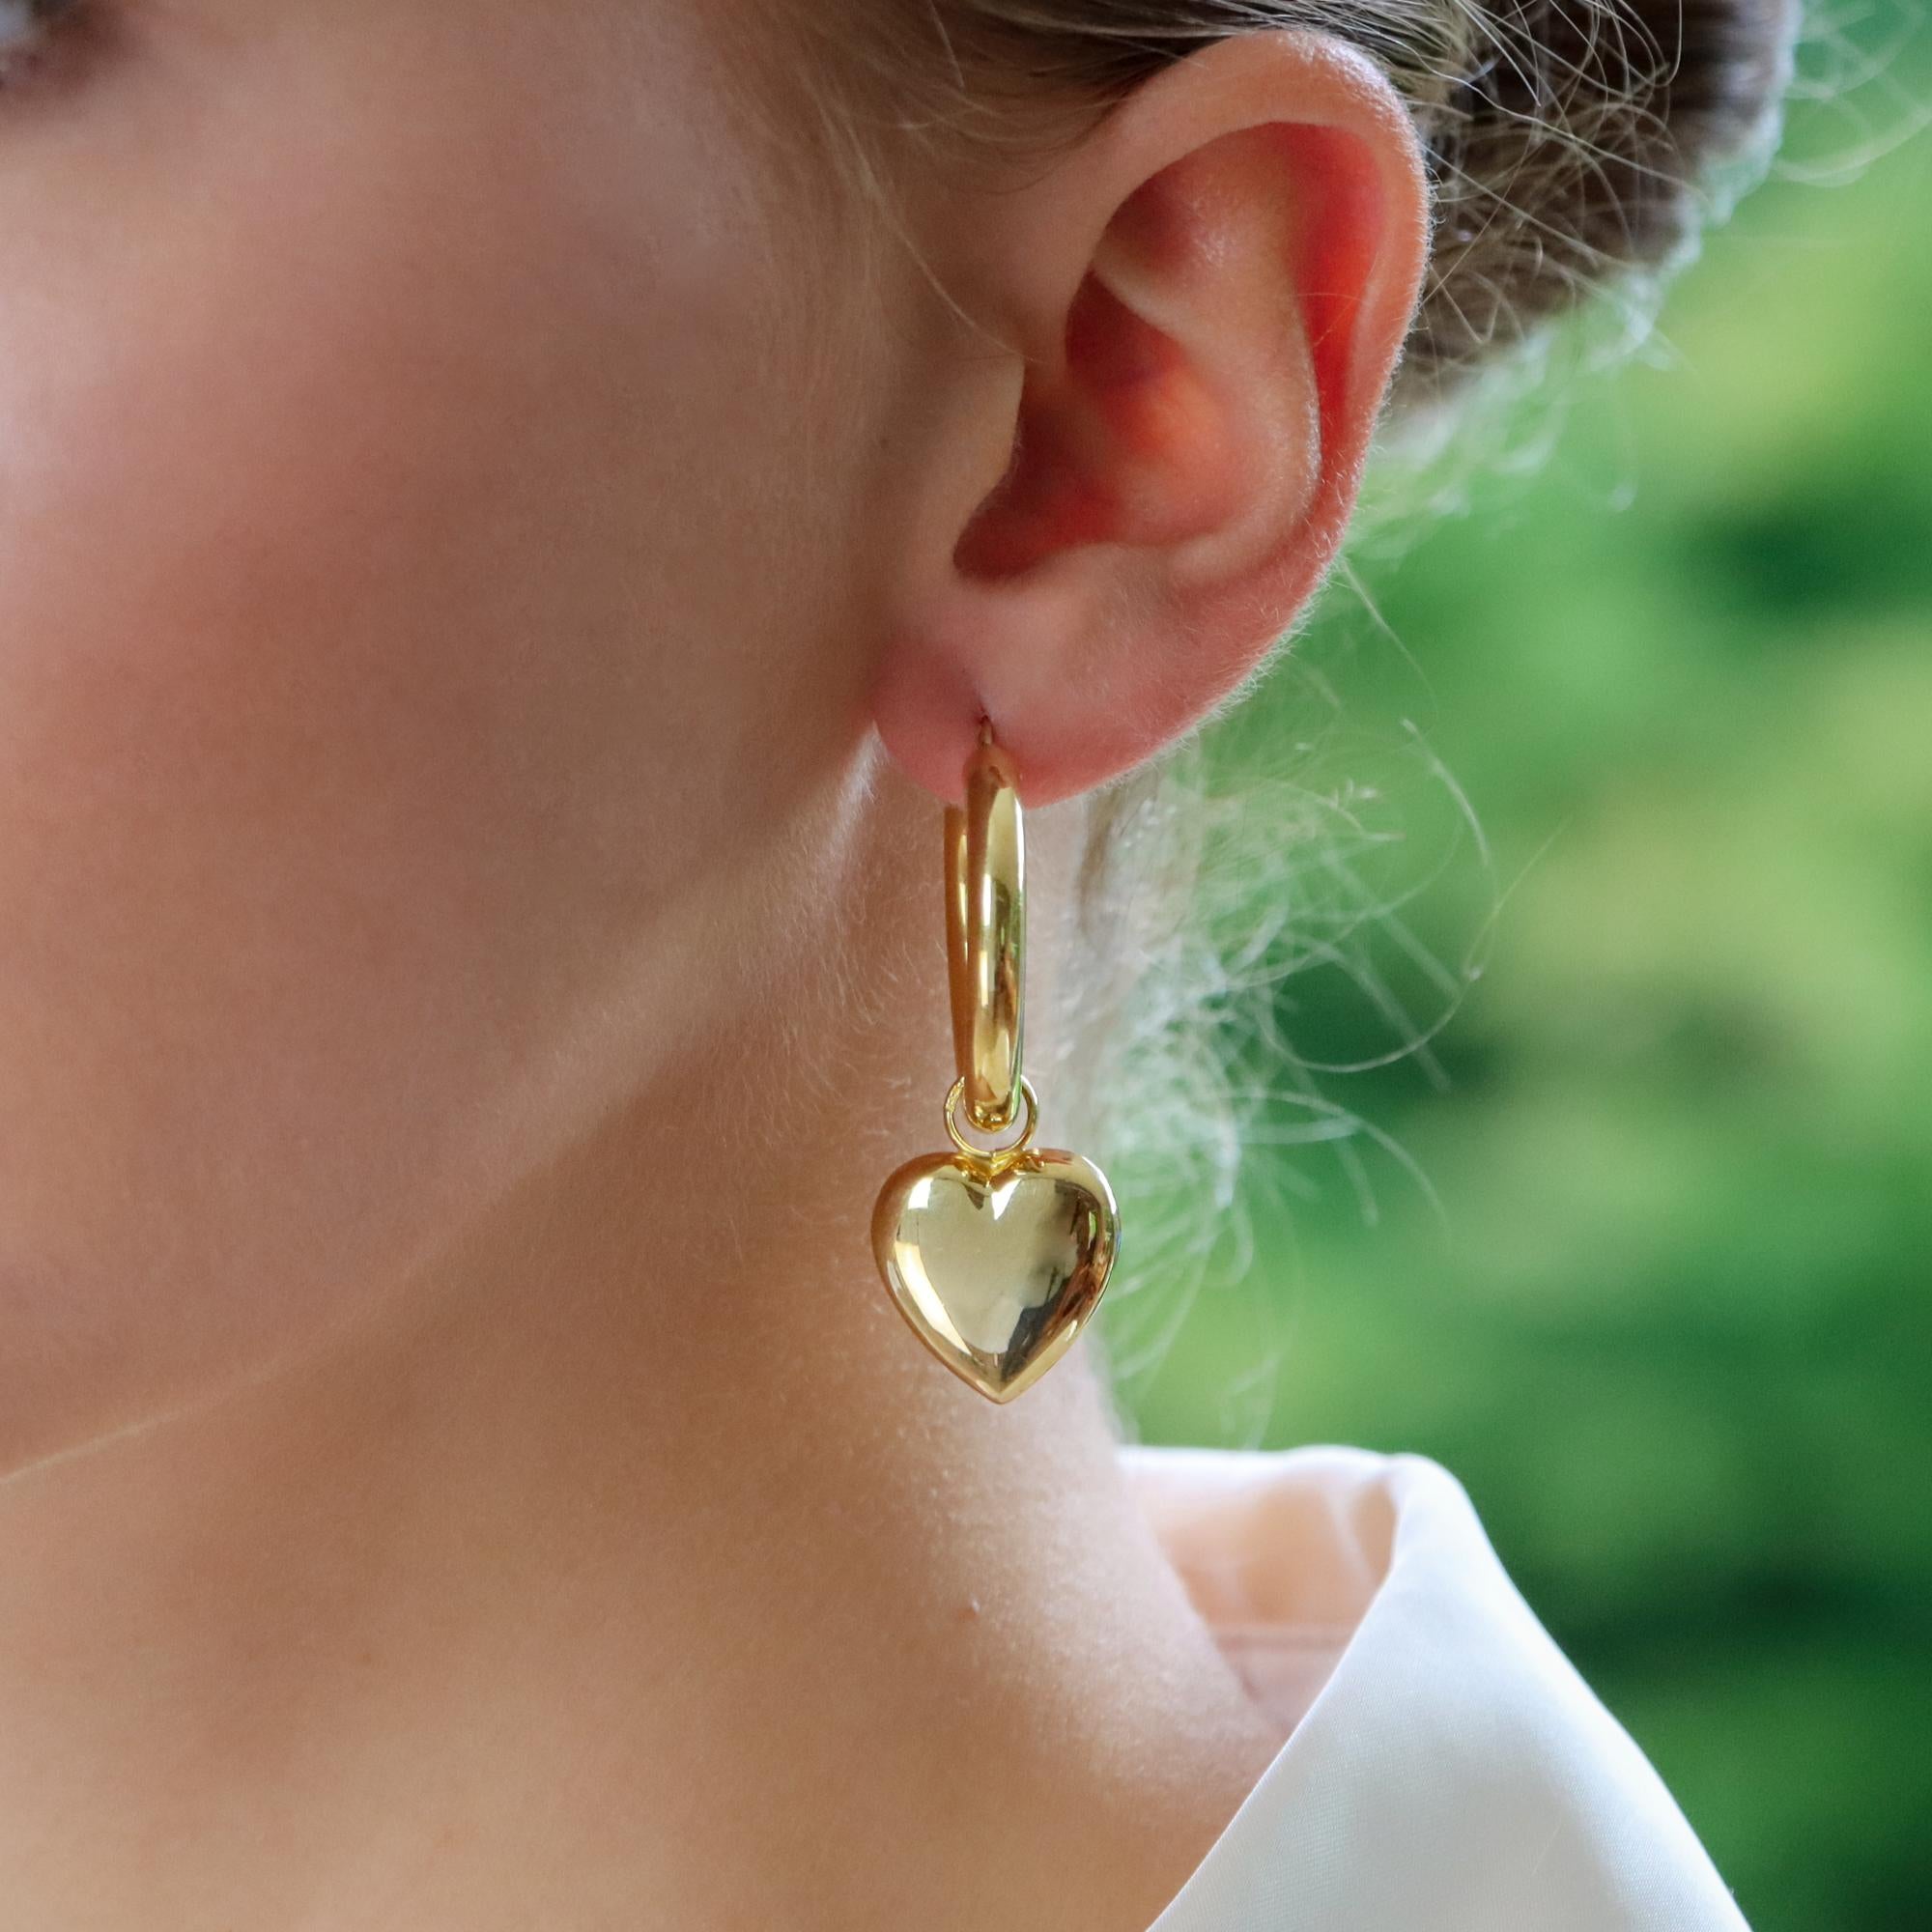 A stylish everyday pair of retro convertible heart hoop earrings set in 9k yellow gold.

These fabulous earrings are firstly composed of a large 28-millimetre round hoop. Suspending from the hoop is a detachable heart drop which freely hangs and